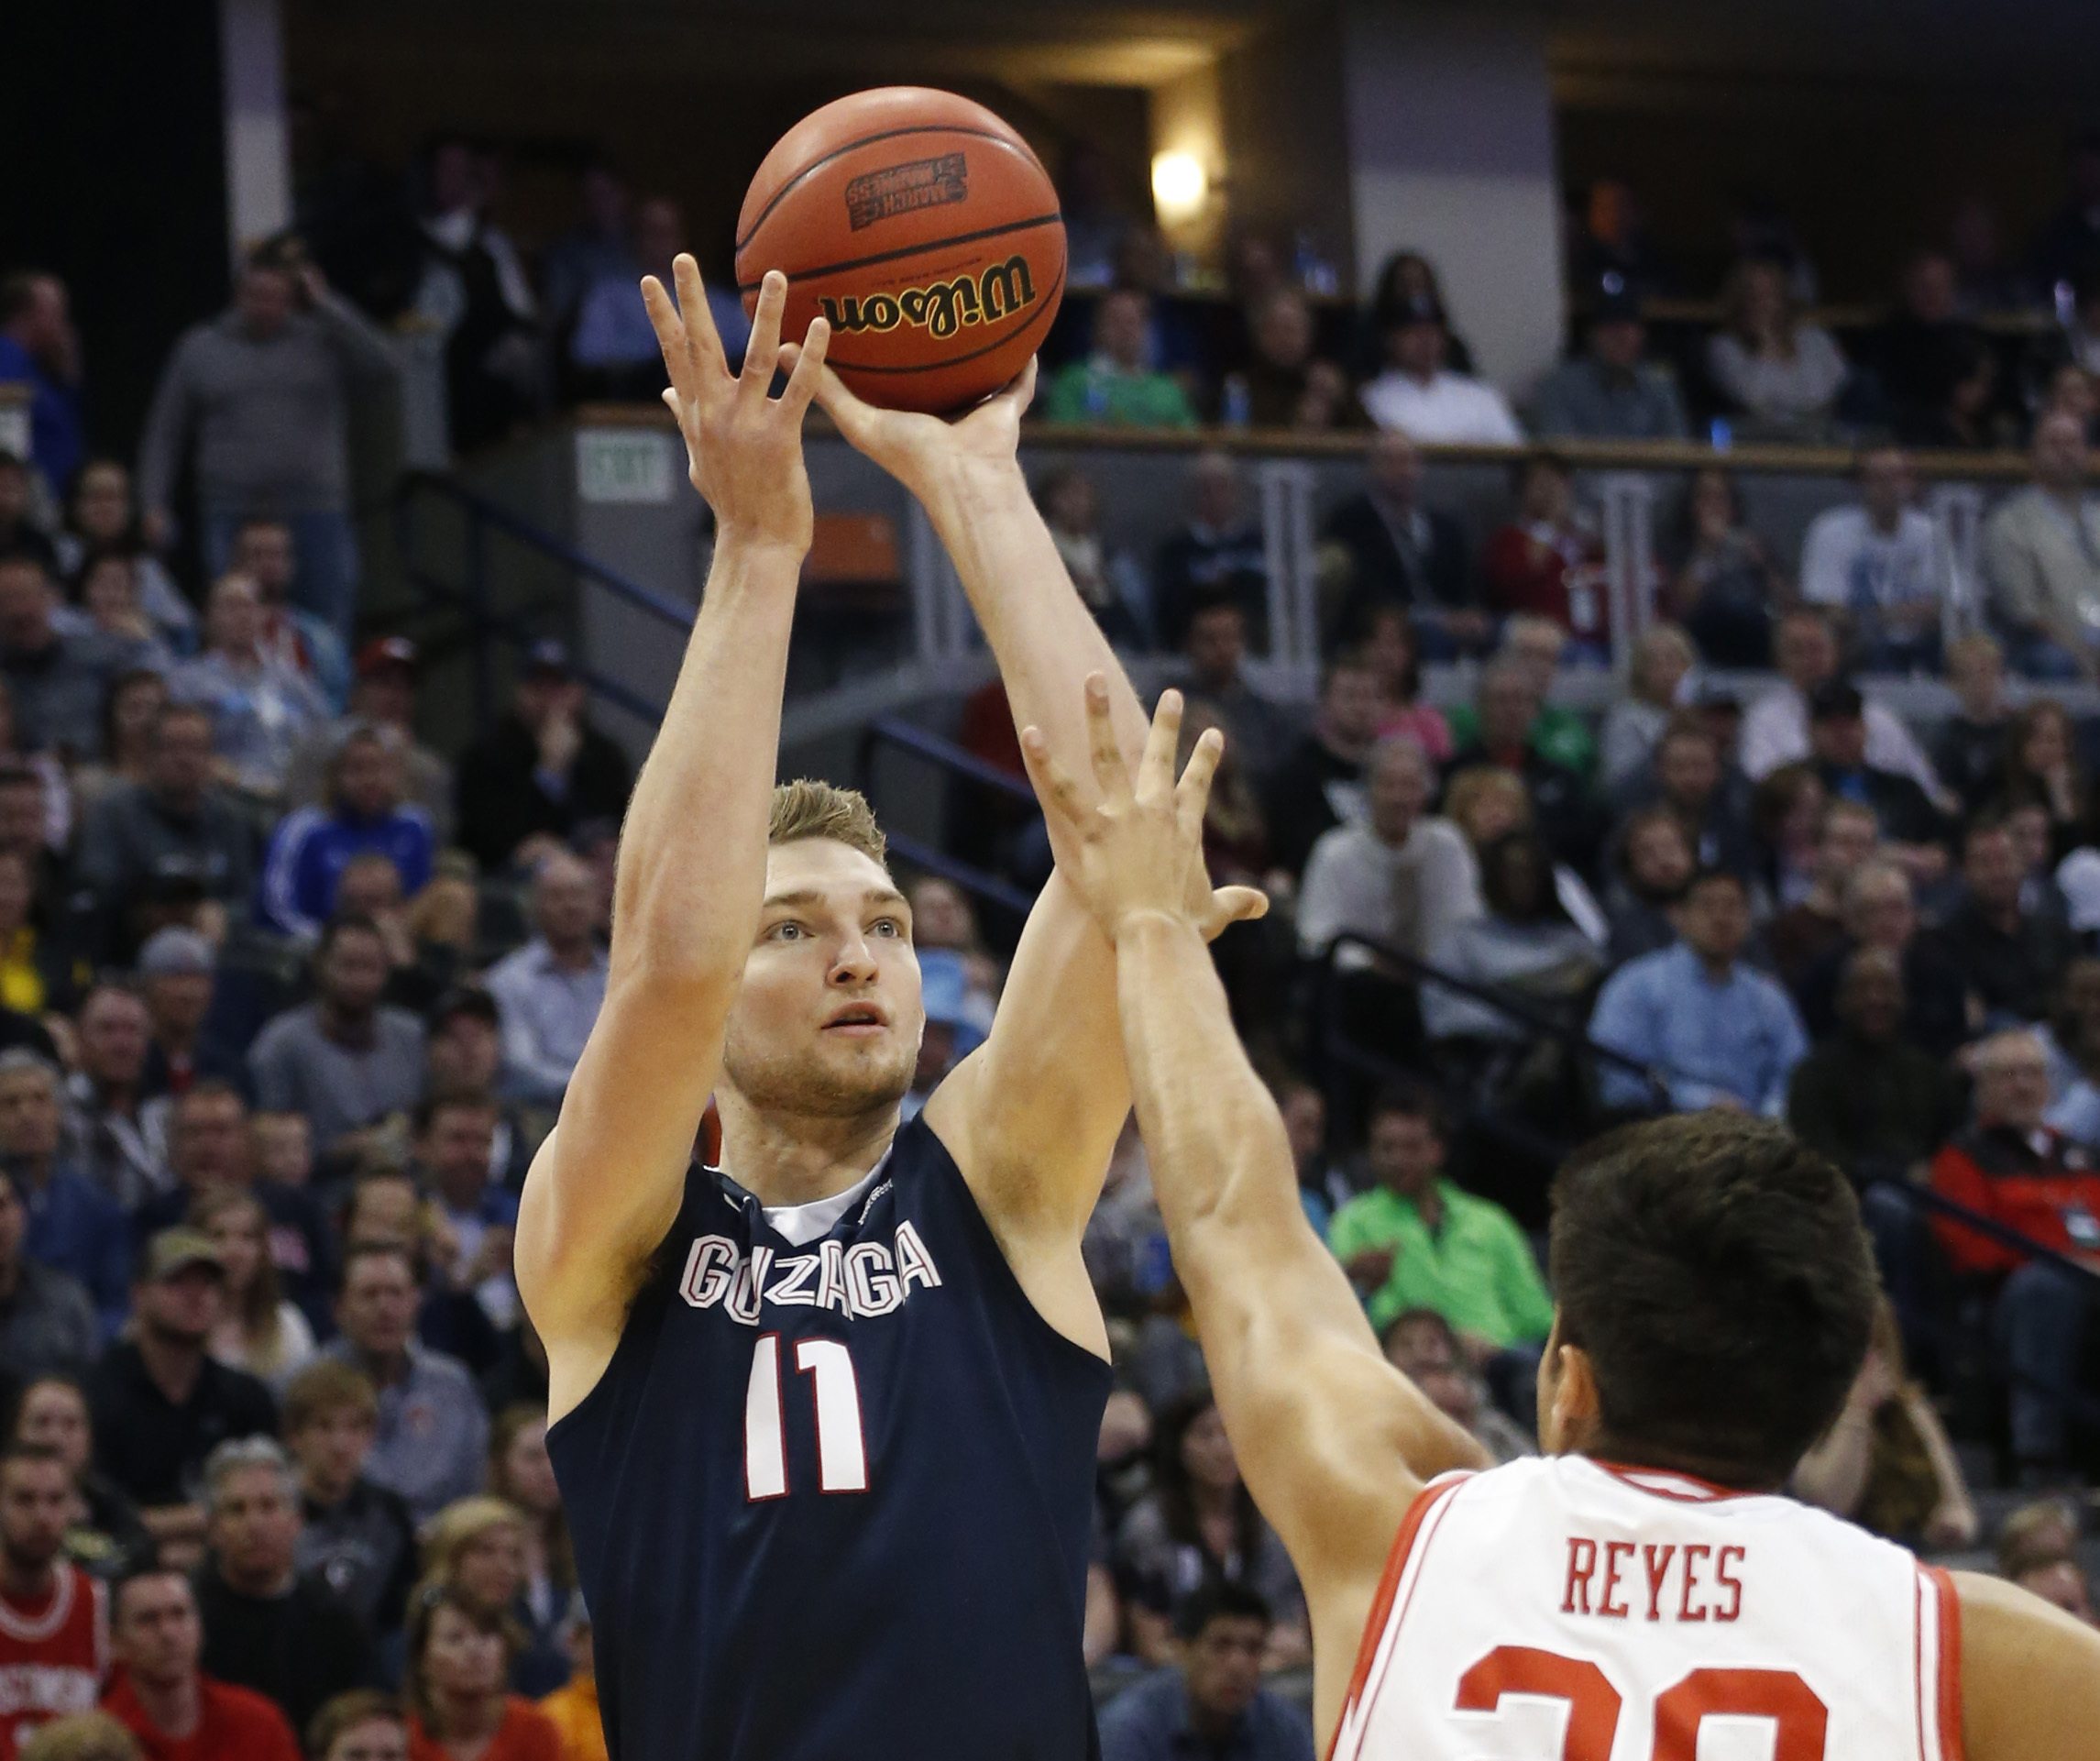 Gonzaga forward Domantas Sabonis shoots over Utah forward Chris Reyes during the first half of a second-round men's college basketball game Saturday, March 19, 2016, in the NCAA Tournament in Denver.